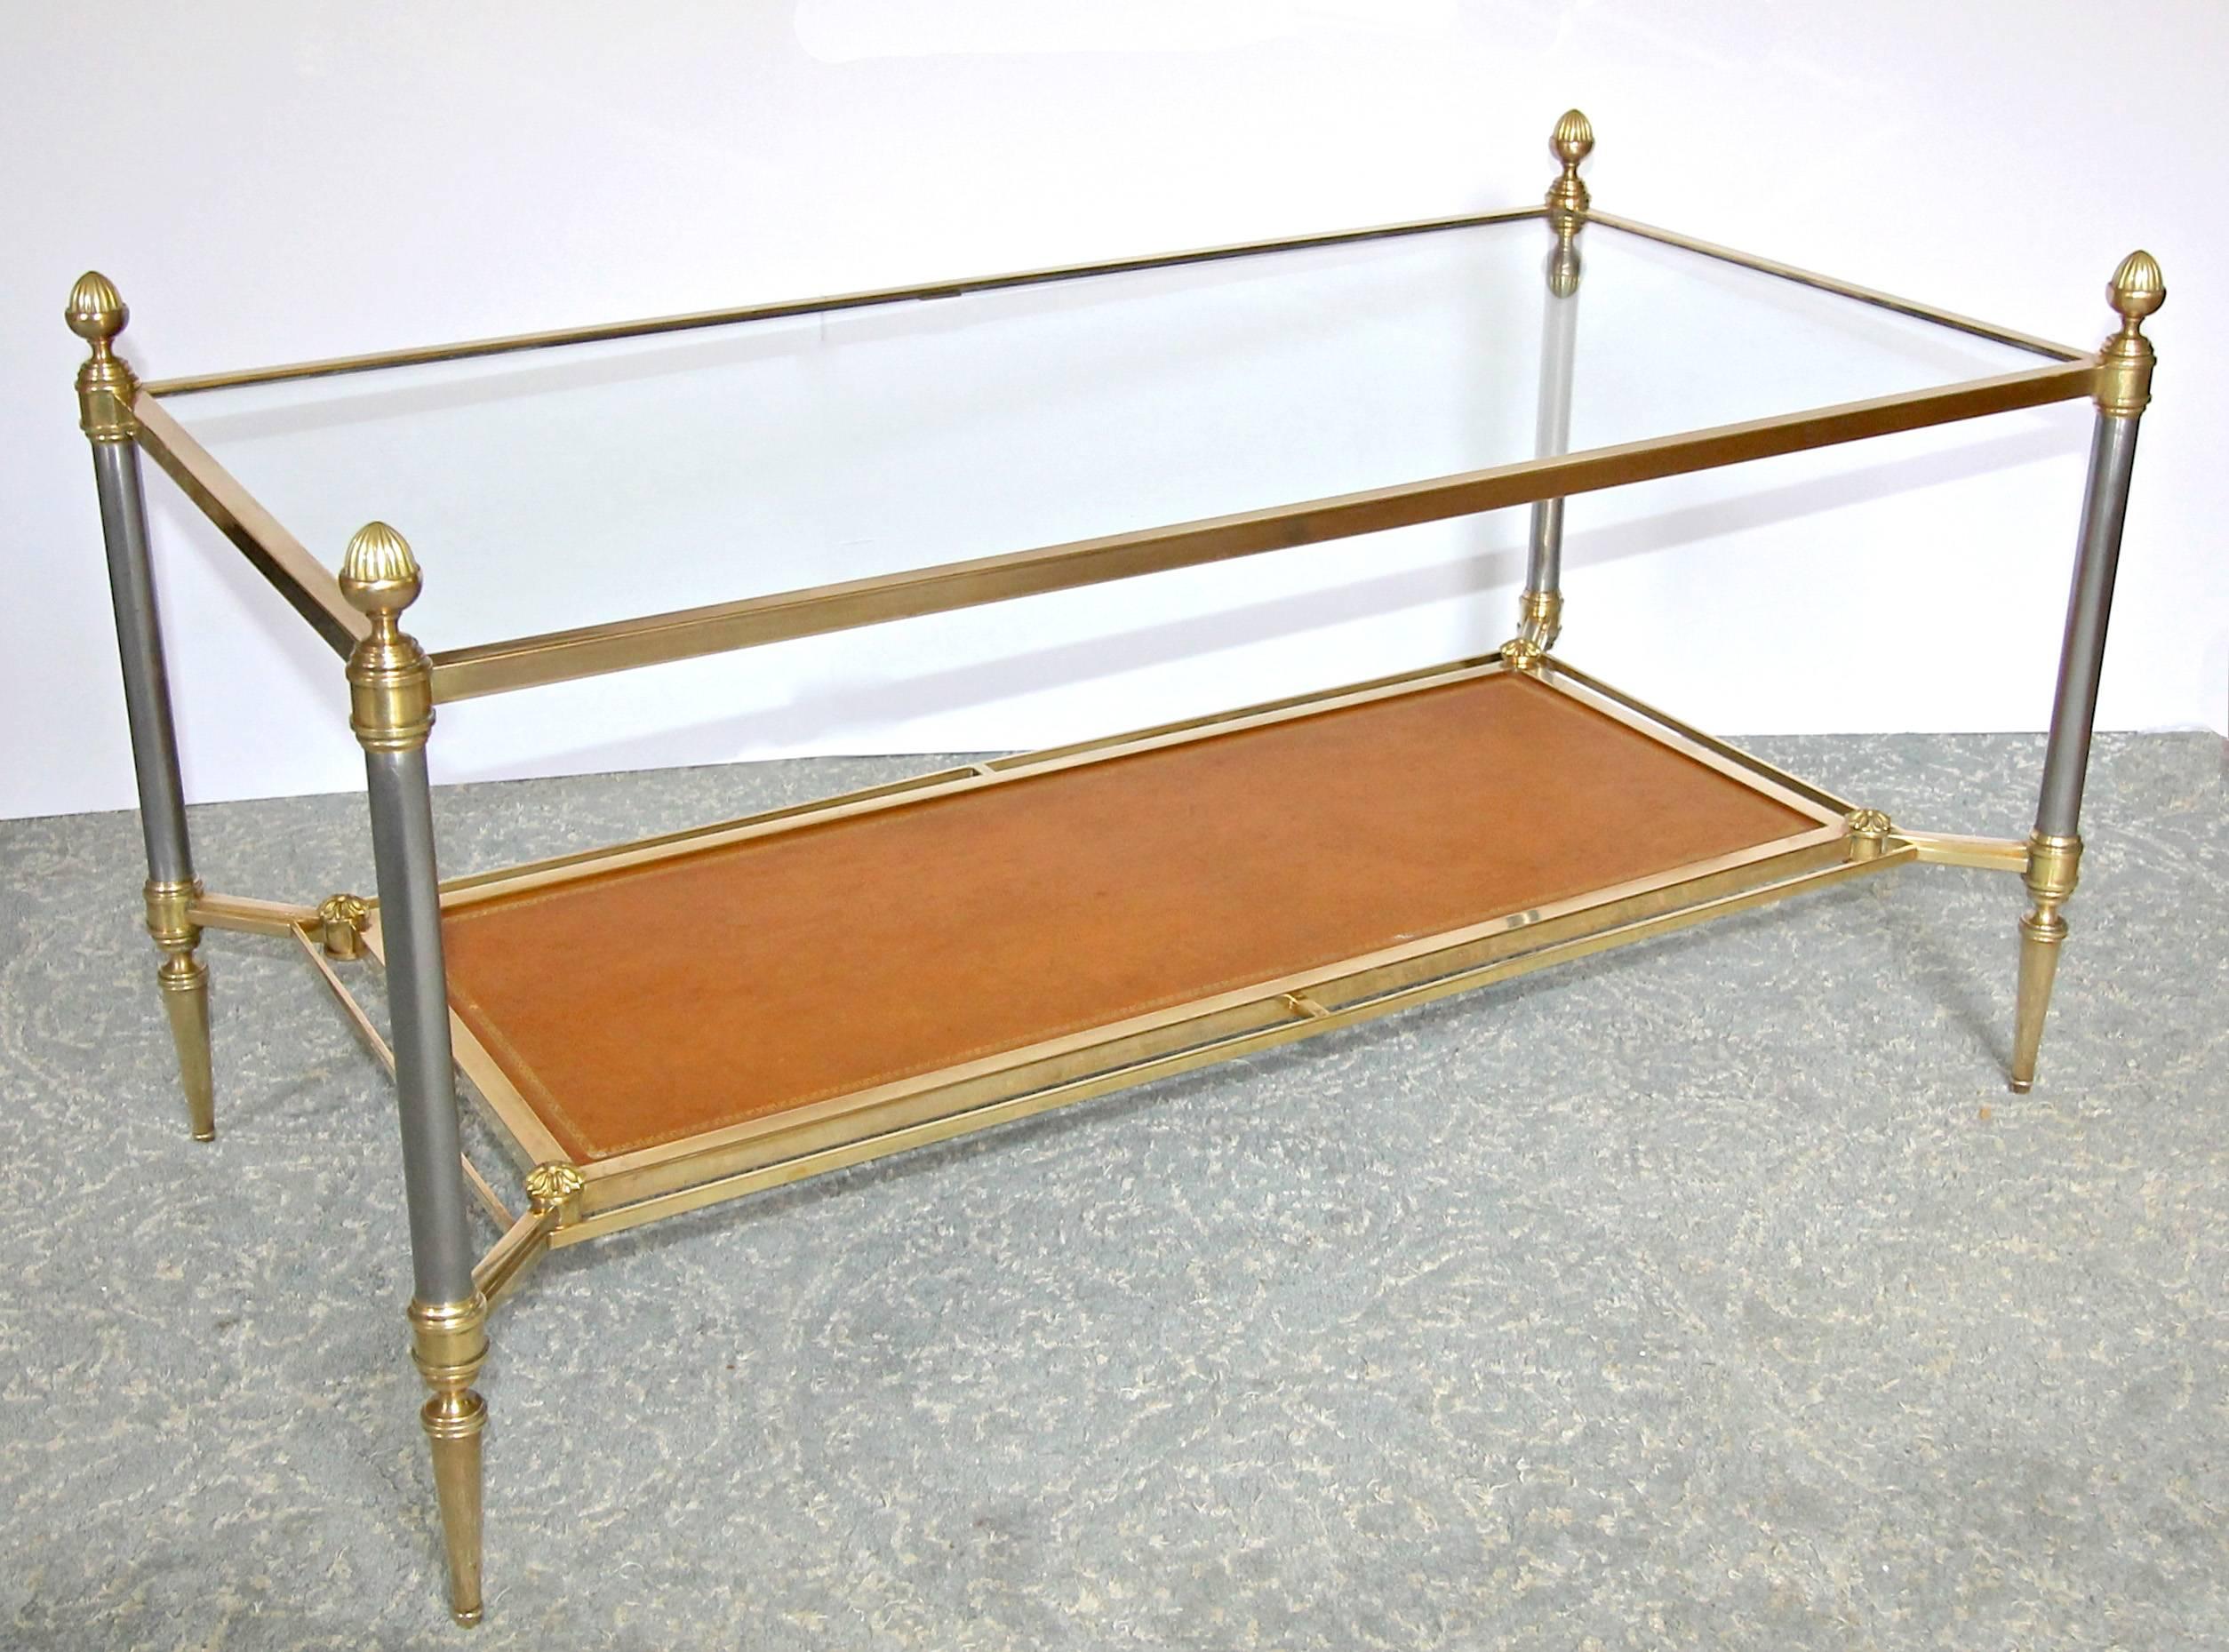 French bronze or brass and polished steel two-tier coffee or cocktail table. Bottom inset shelf has a tan colored tooled leather top with gold Greek key border. Top is original inset glass set into the top from the reverse side. Expertly crafted